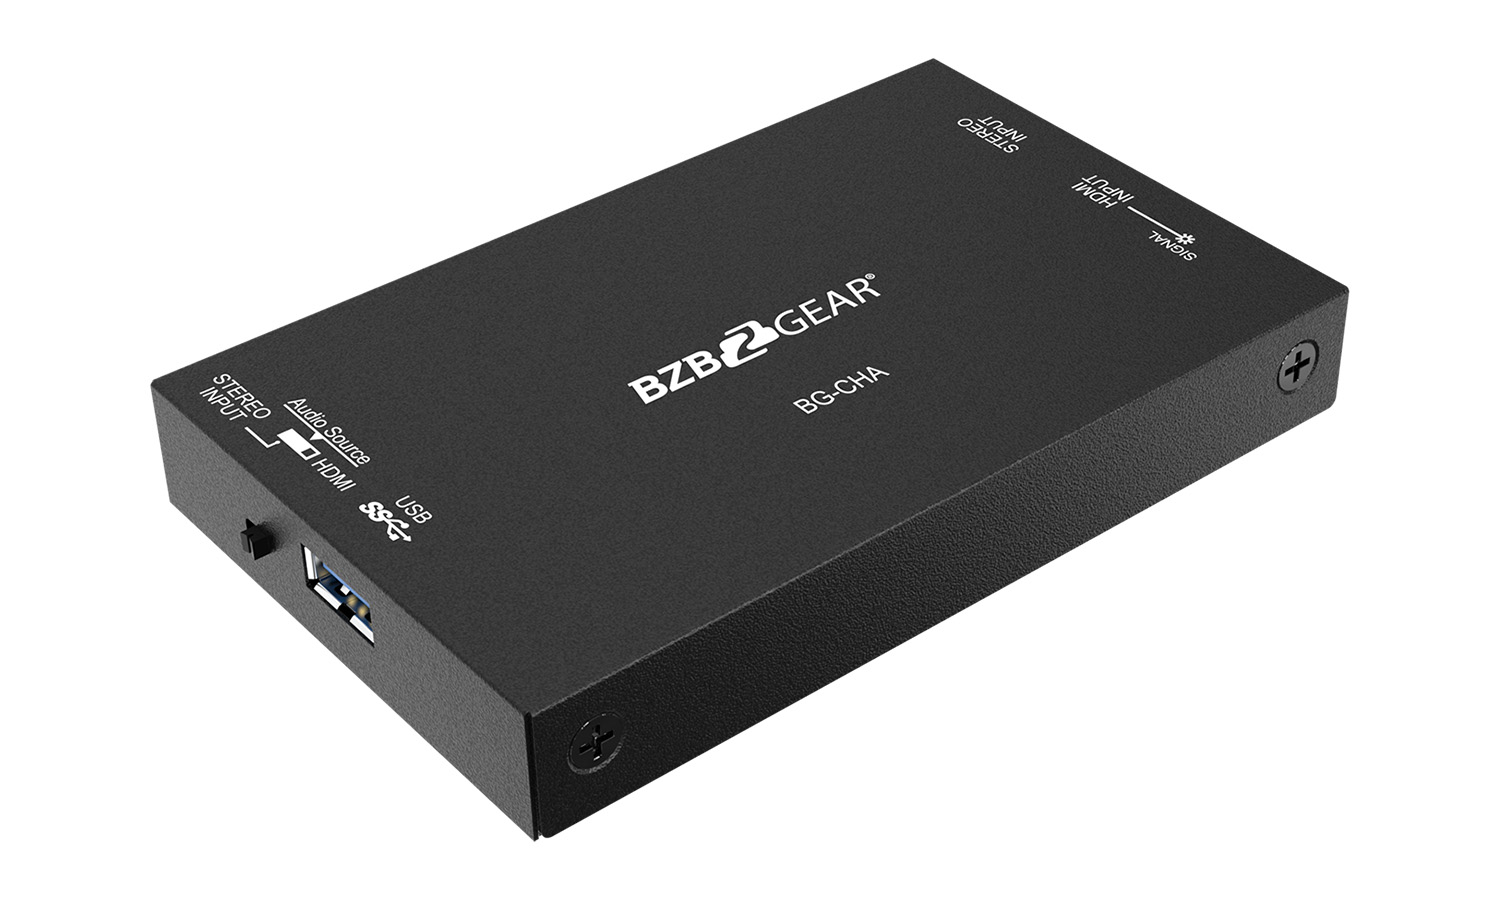 BG-CHA 1080P Full HD USB 3.1 Gen1 Video Capture Device/Box with Scaler and Audio by BZBGEAR